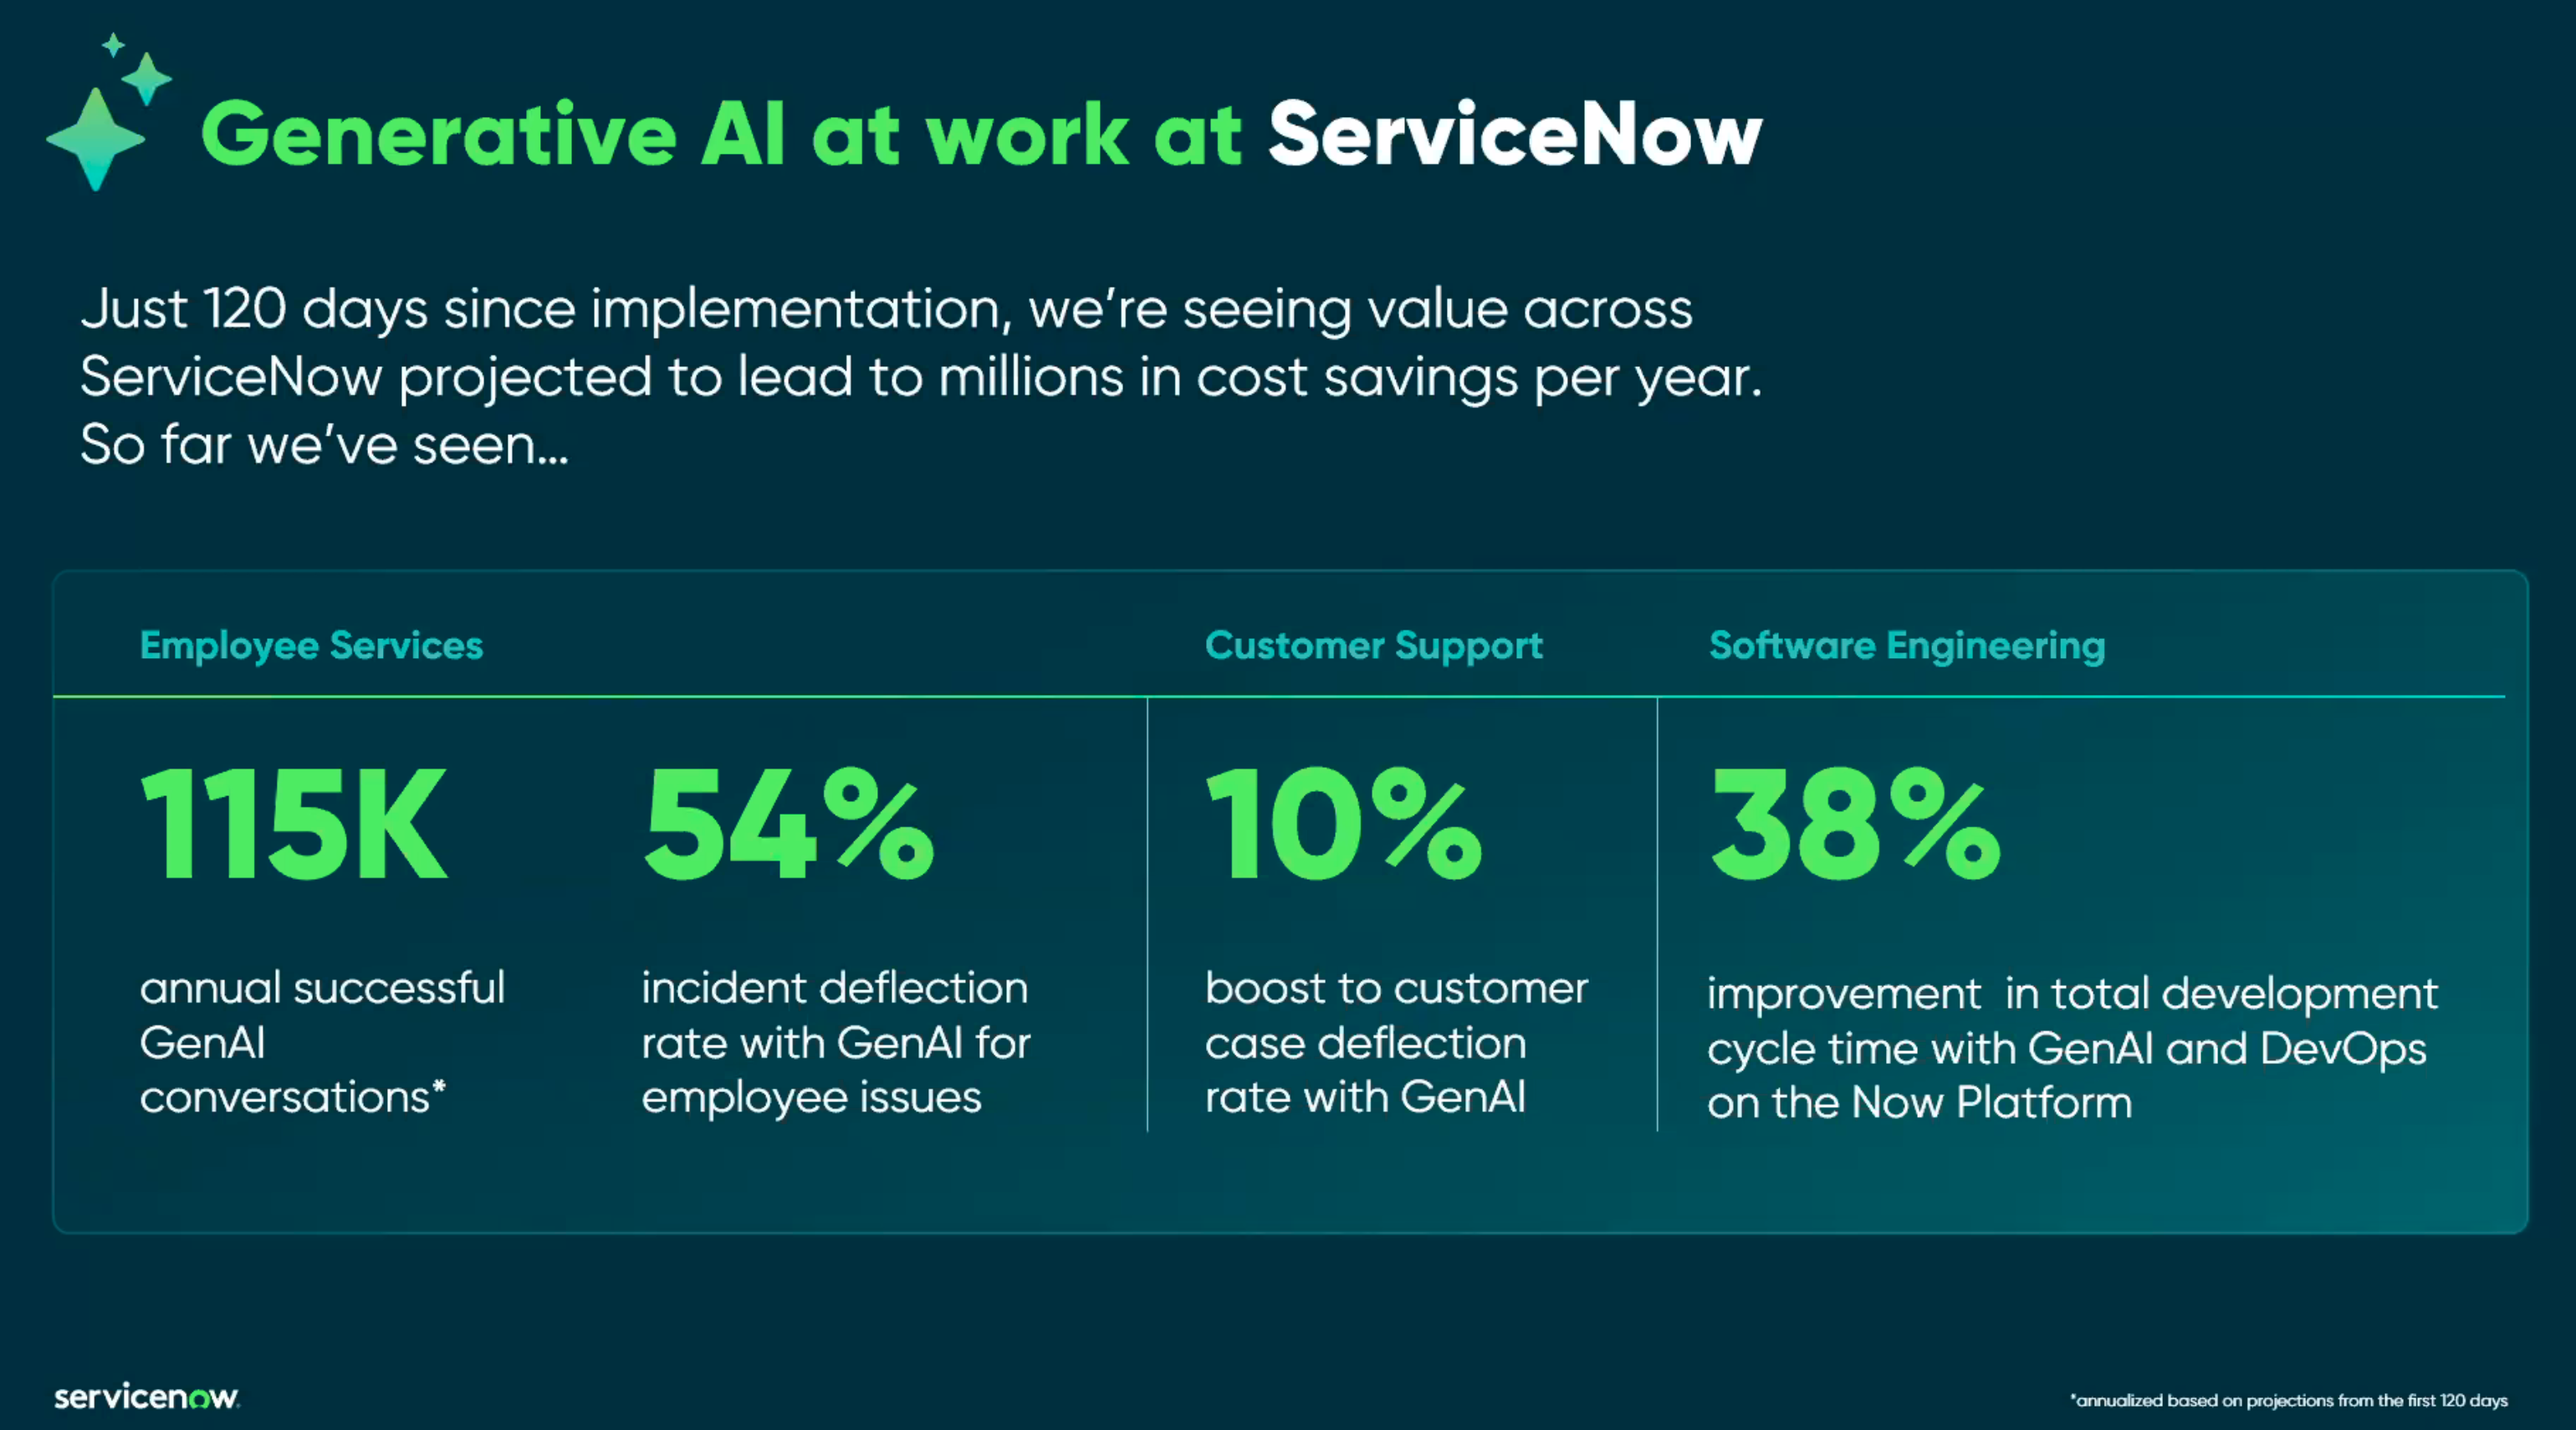 Generative AI used at ServiceNow